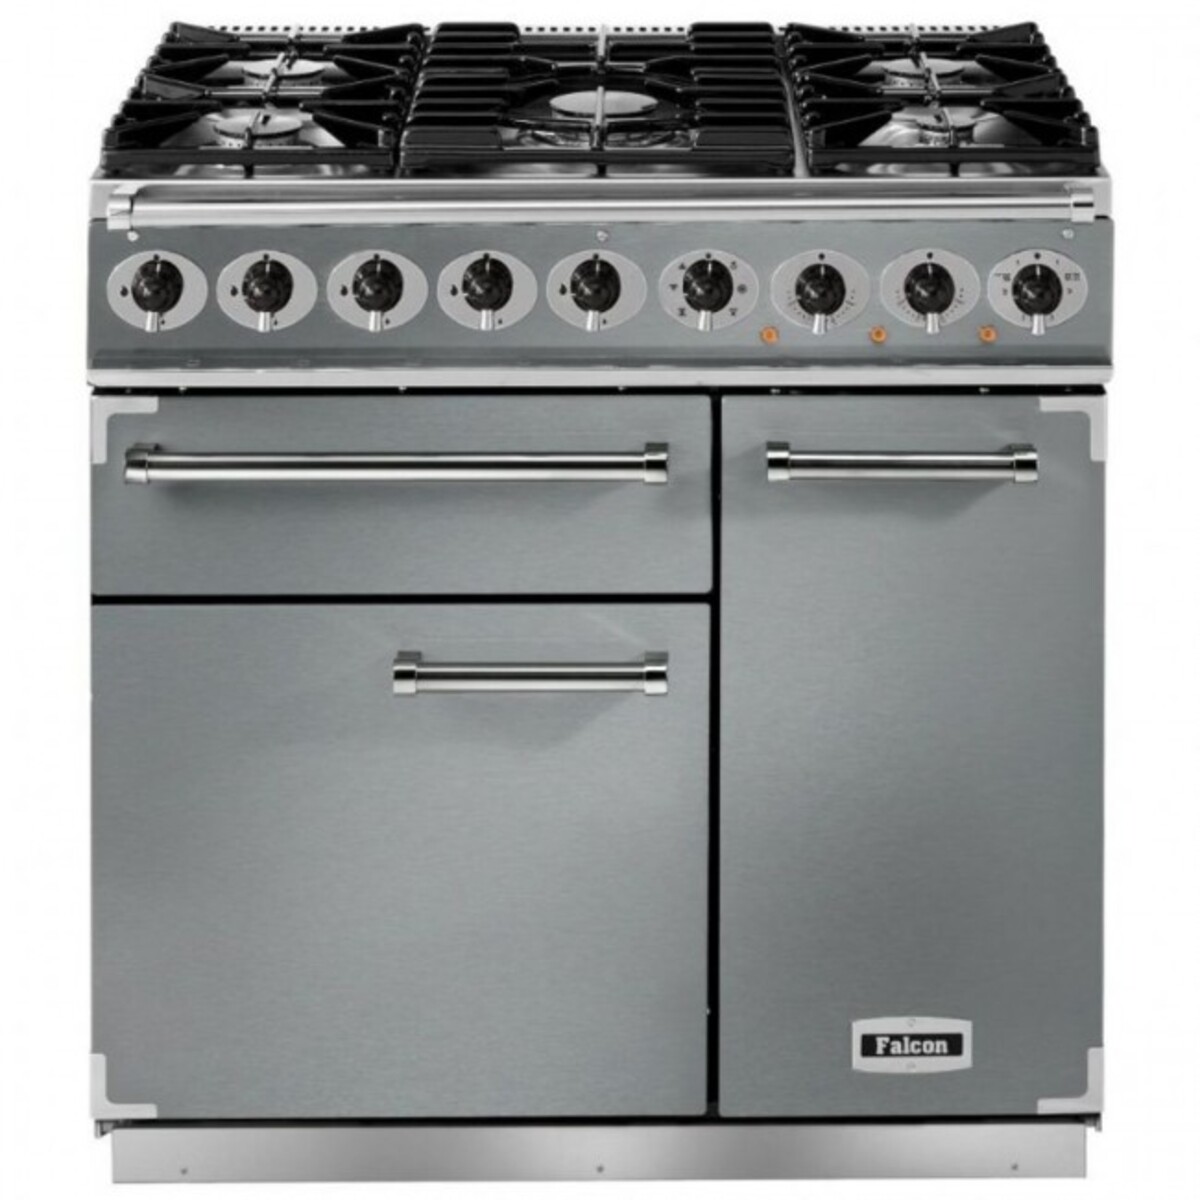 FALCON F900DXDFSSCM 77070 - 90cm Deluxe Dual Fuel Range Cooker, Stainless S